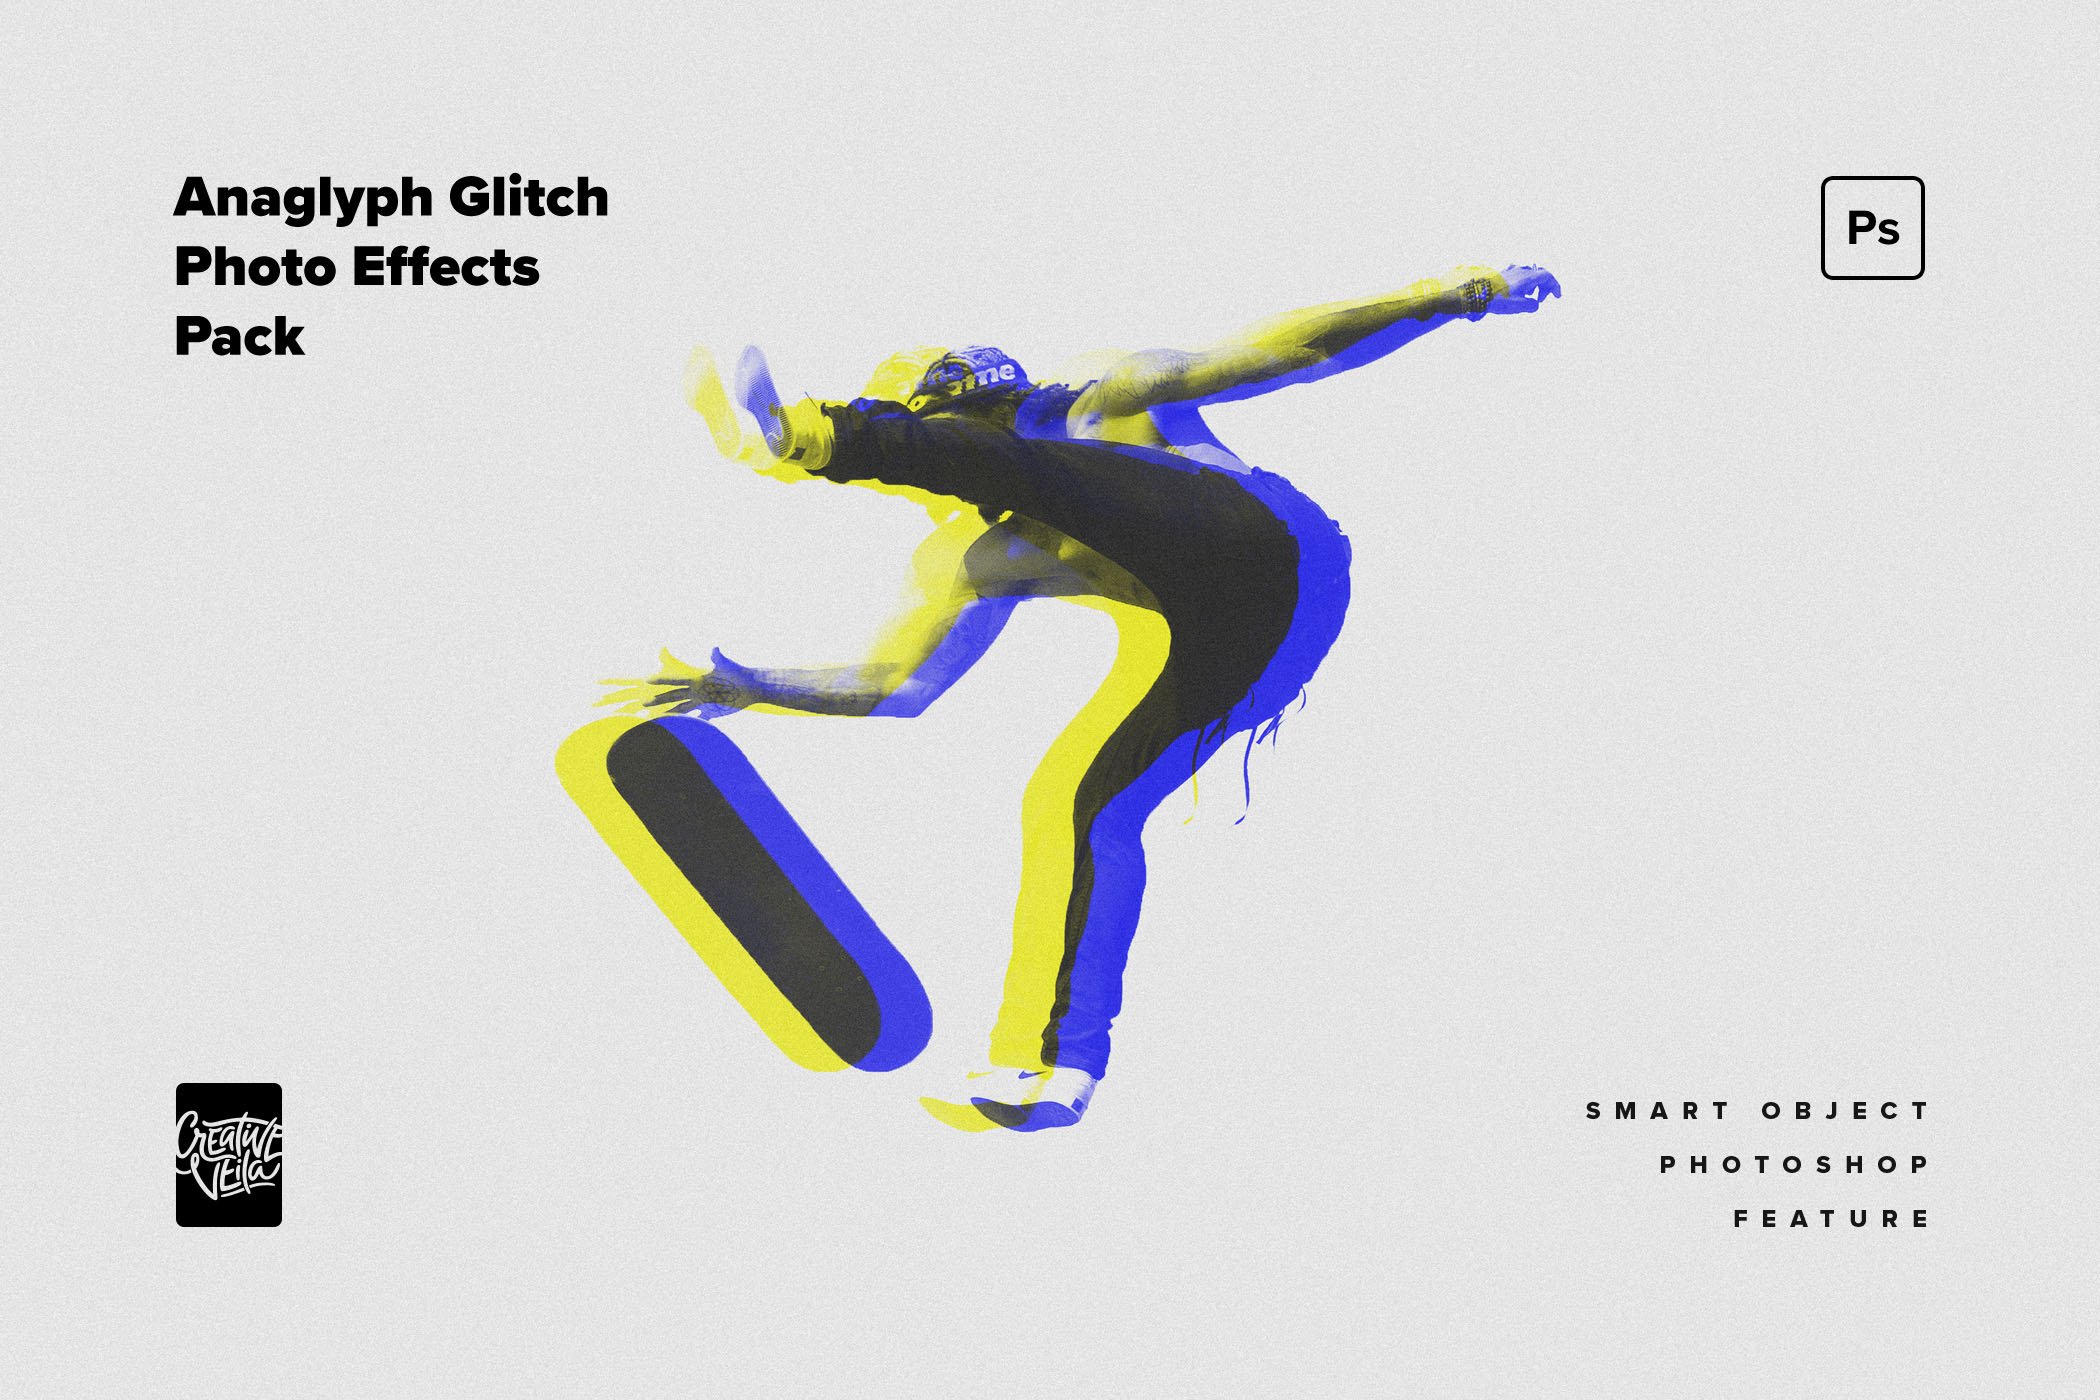 Anaglyph Glitch Photo Effects Packpreview image.